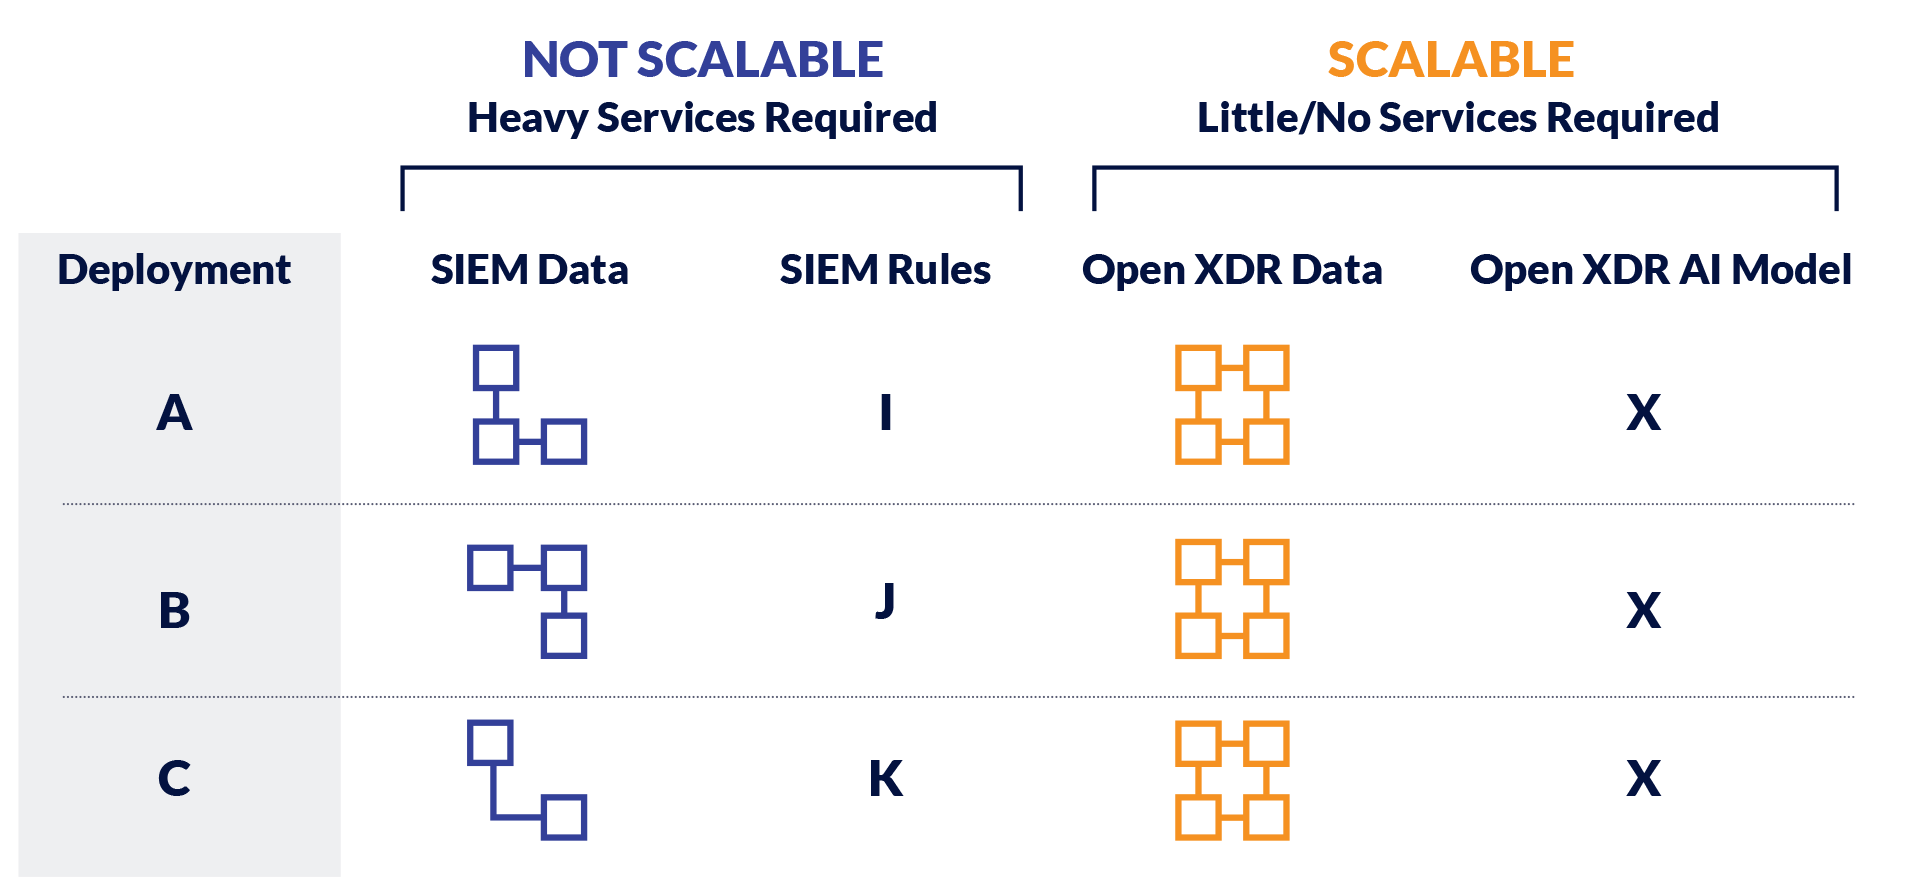 Comparing scalable vs non-scalable deployments with XDR tools and SIEM tools